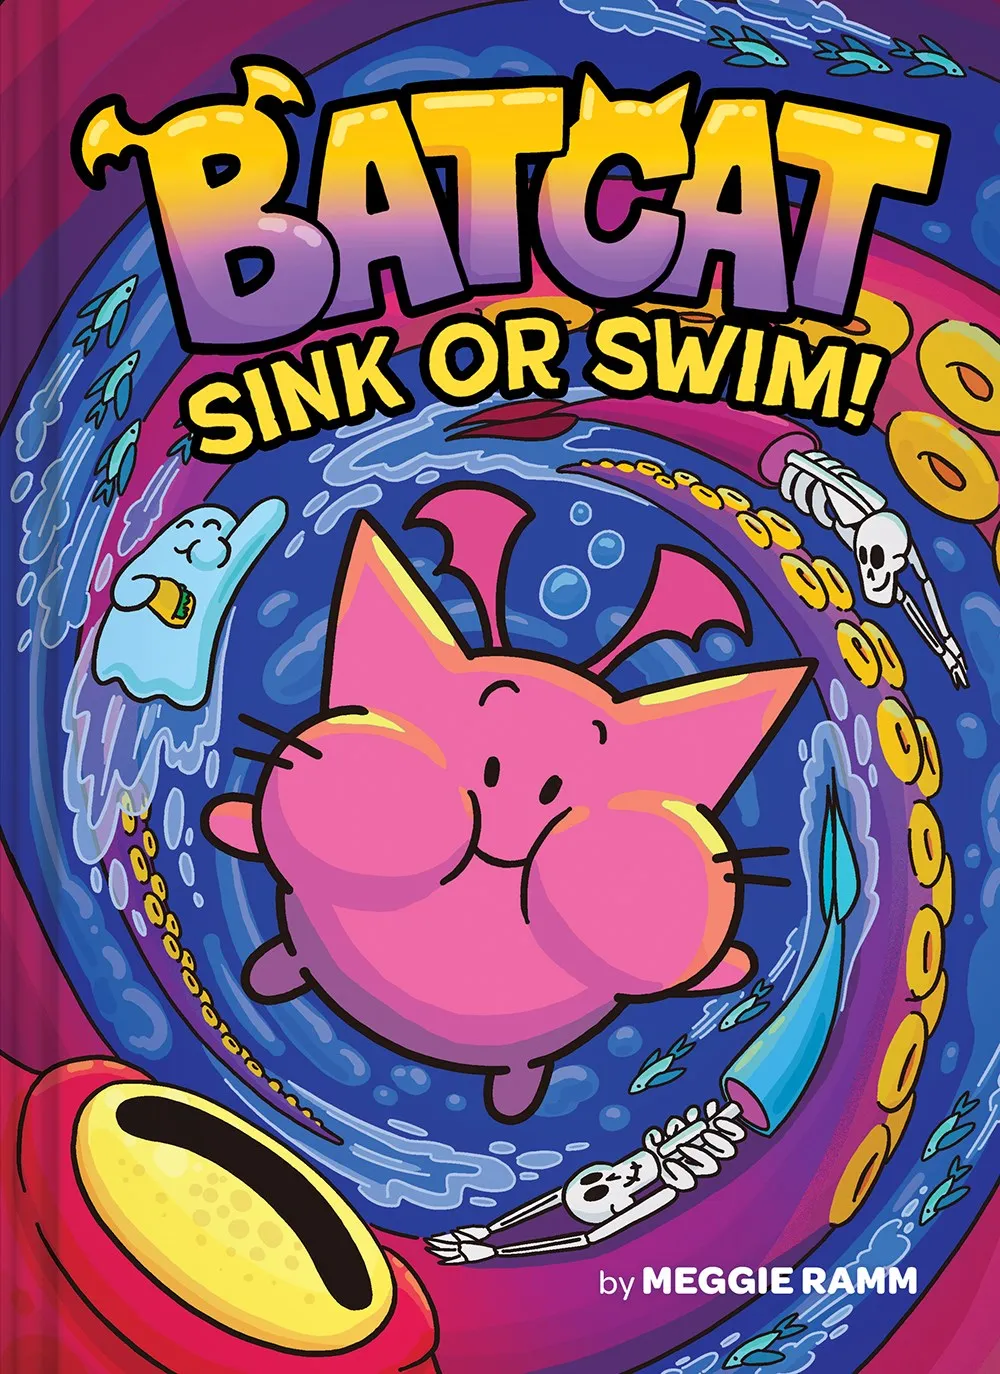 Cover of Batcat: Sink or Swim by Meggie Ramm